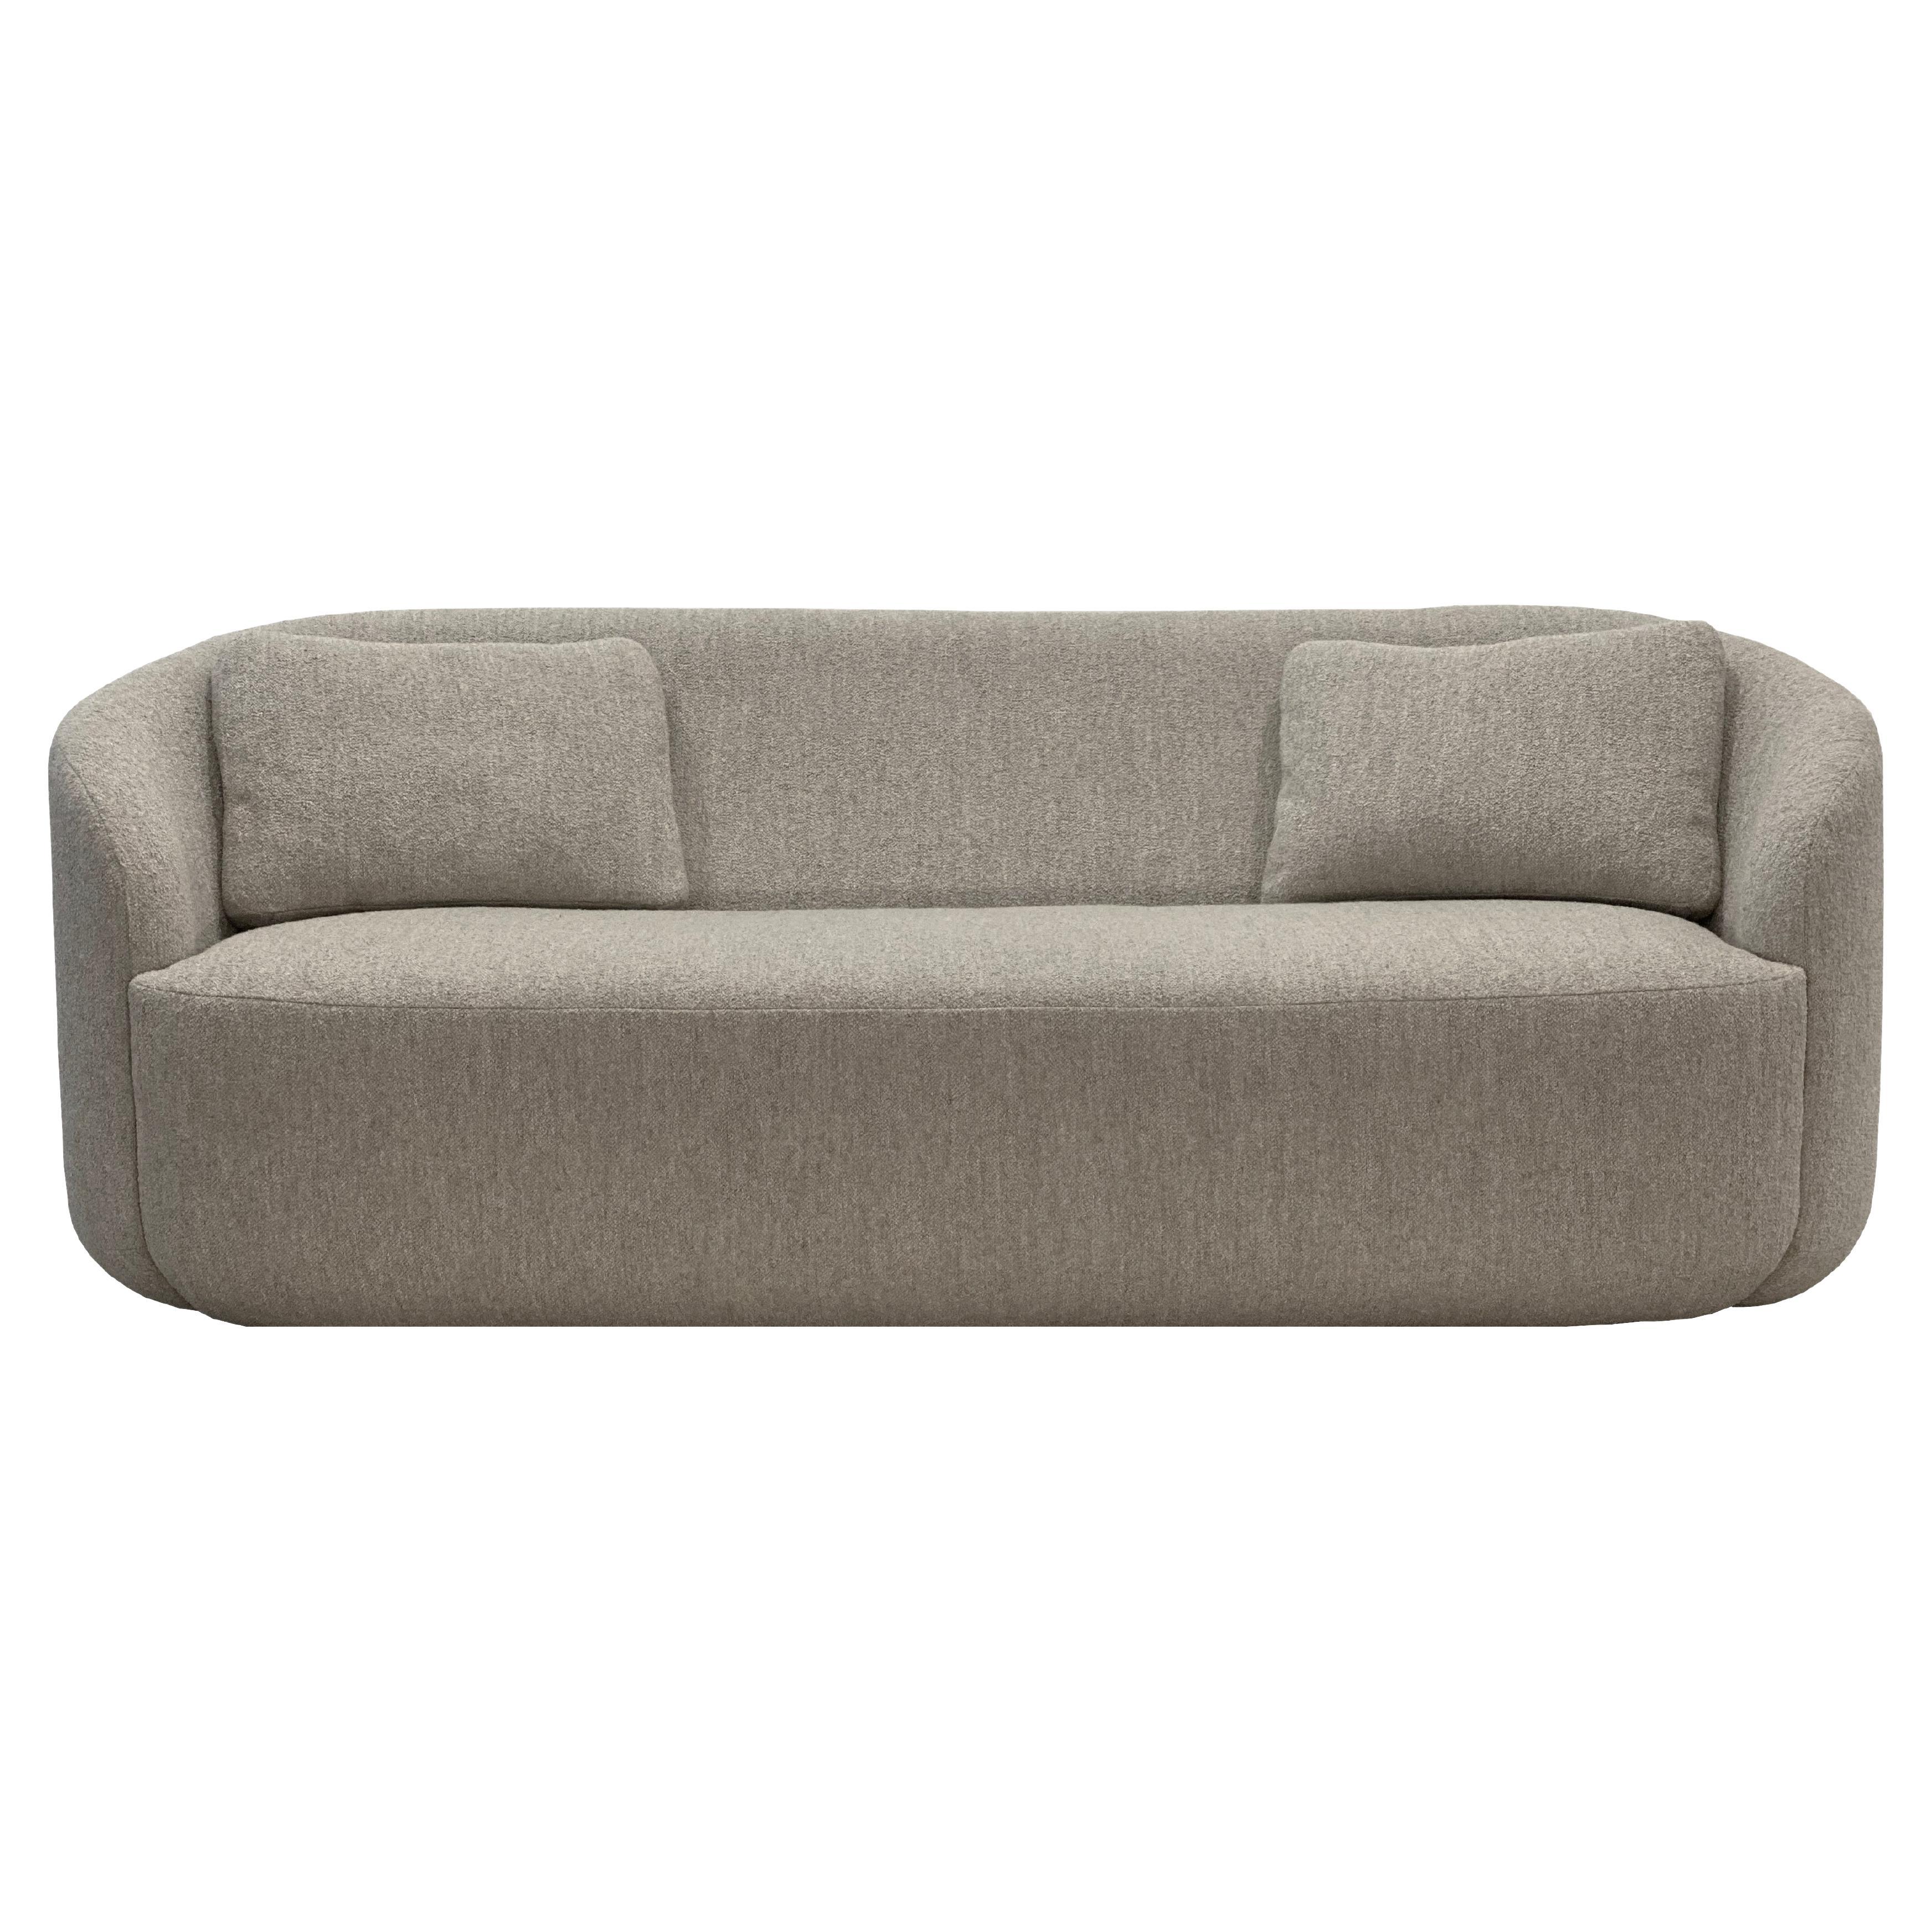 Curved Sofa 'Cottonflower' in Quinoa Fabric by Kabinet